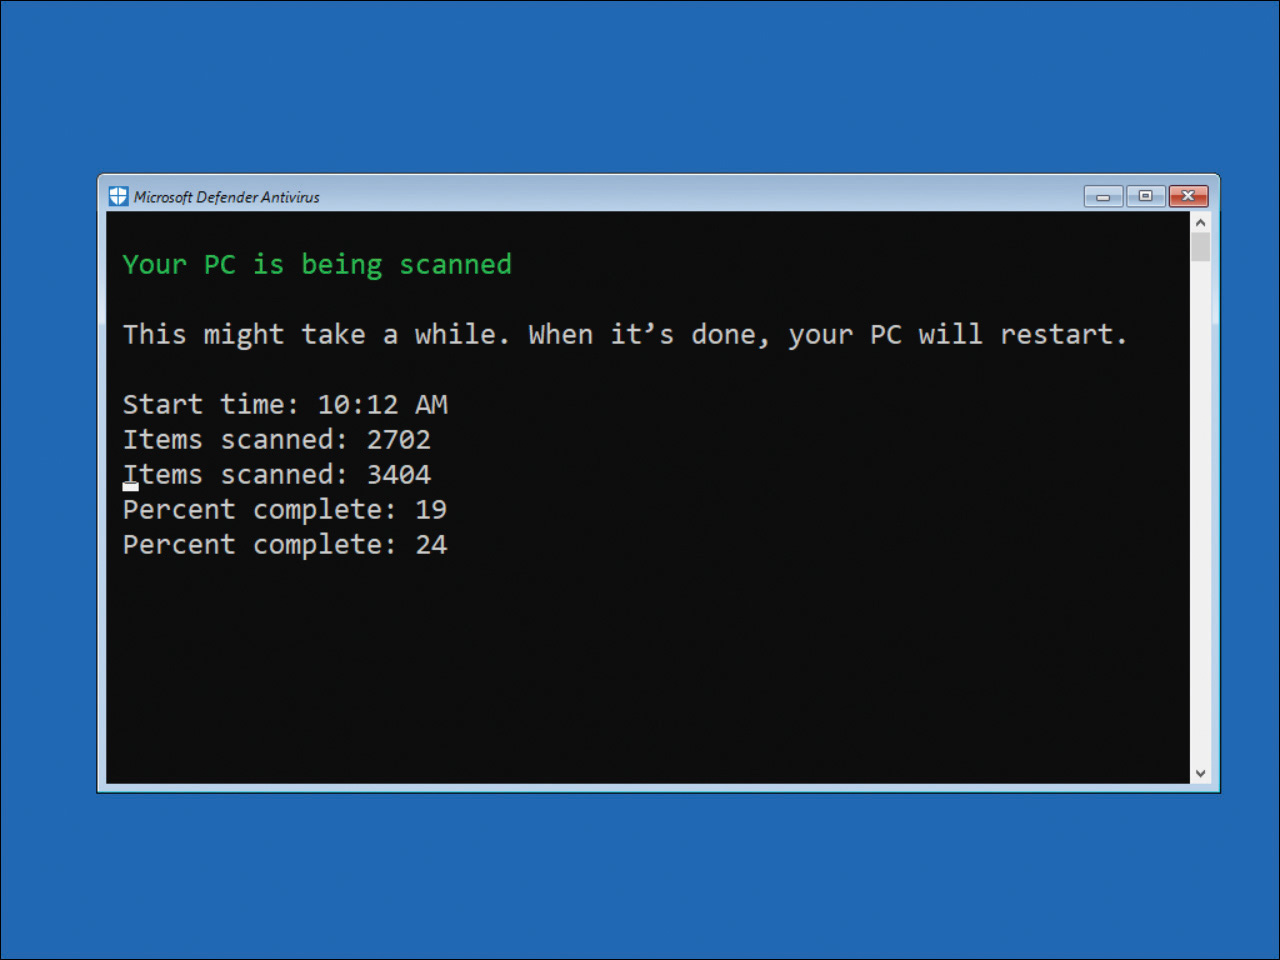 A screenshot shows the Microsoft Defender Offline scanning tool. The screen is blue with a command line console with the title Microsoft Defender Antivirus. Inside the console there is text relating to the progress of the scan.